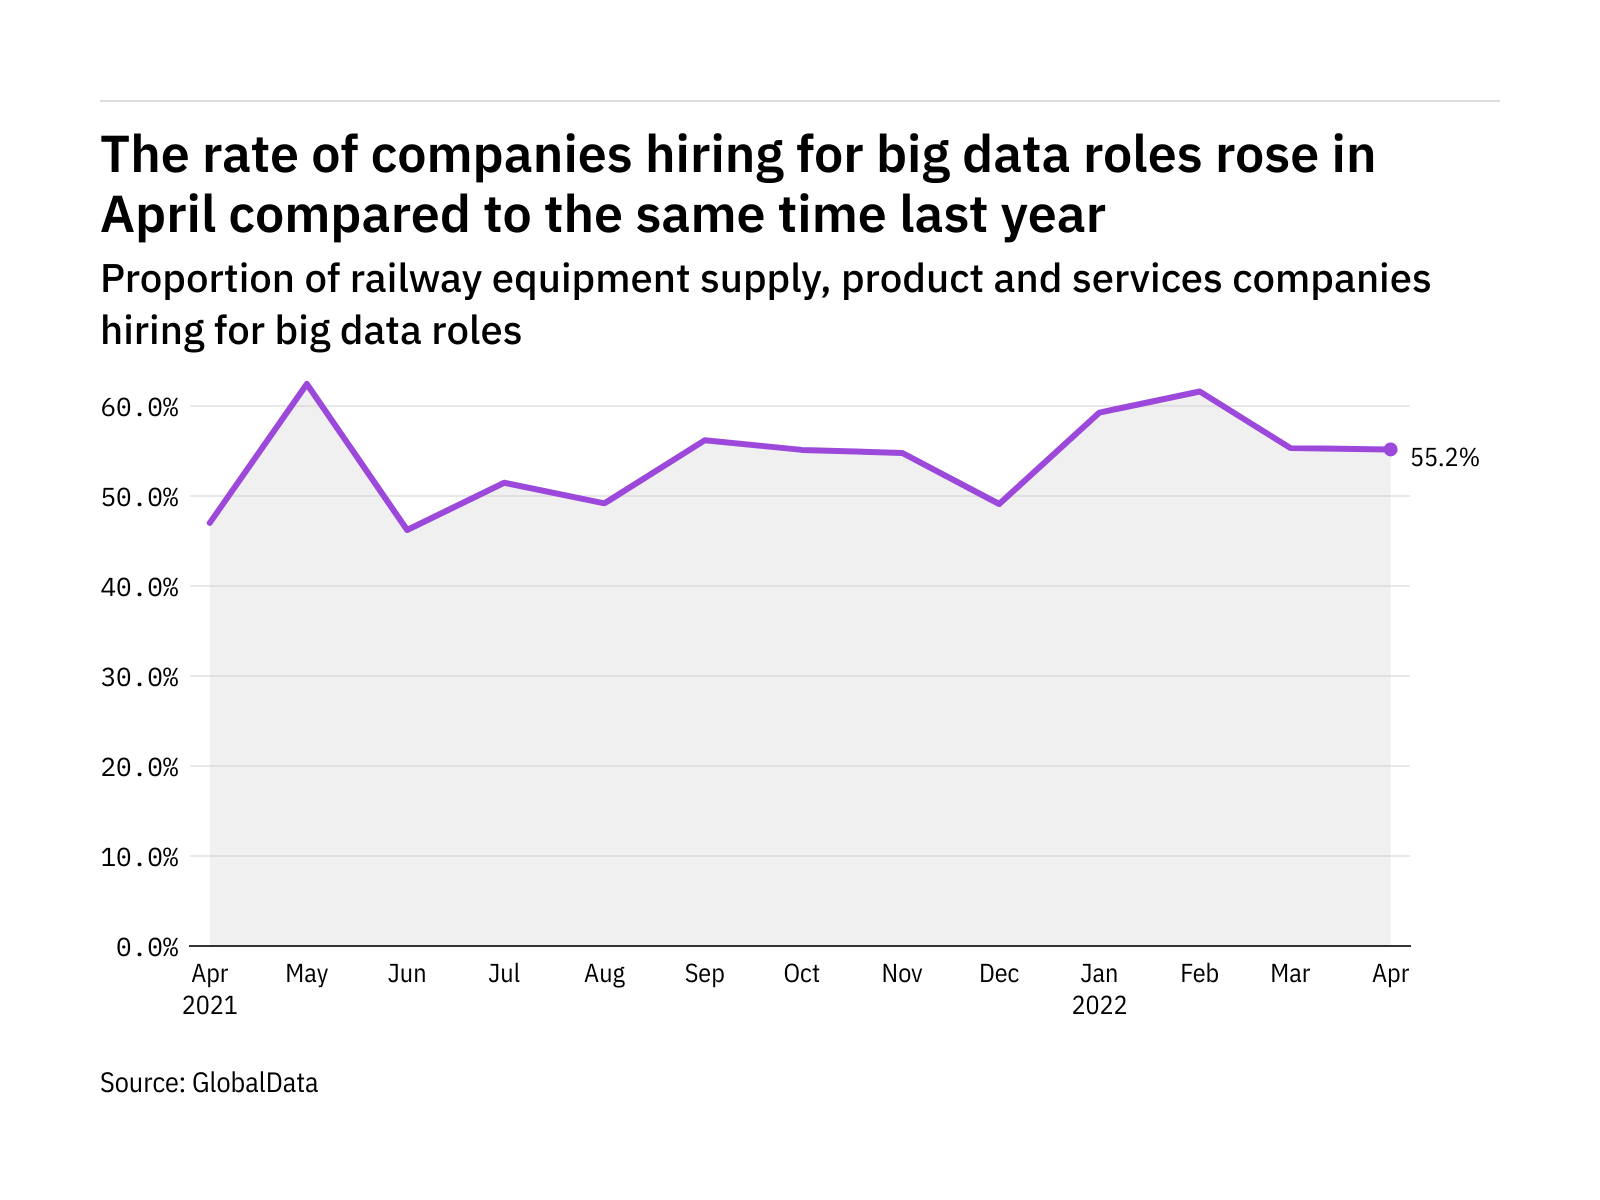 Big data hiring levels in the railway industry rose in April 2022